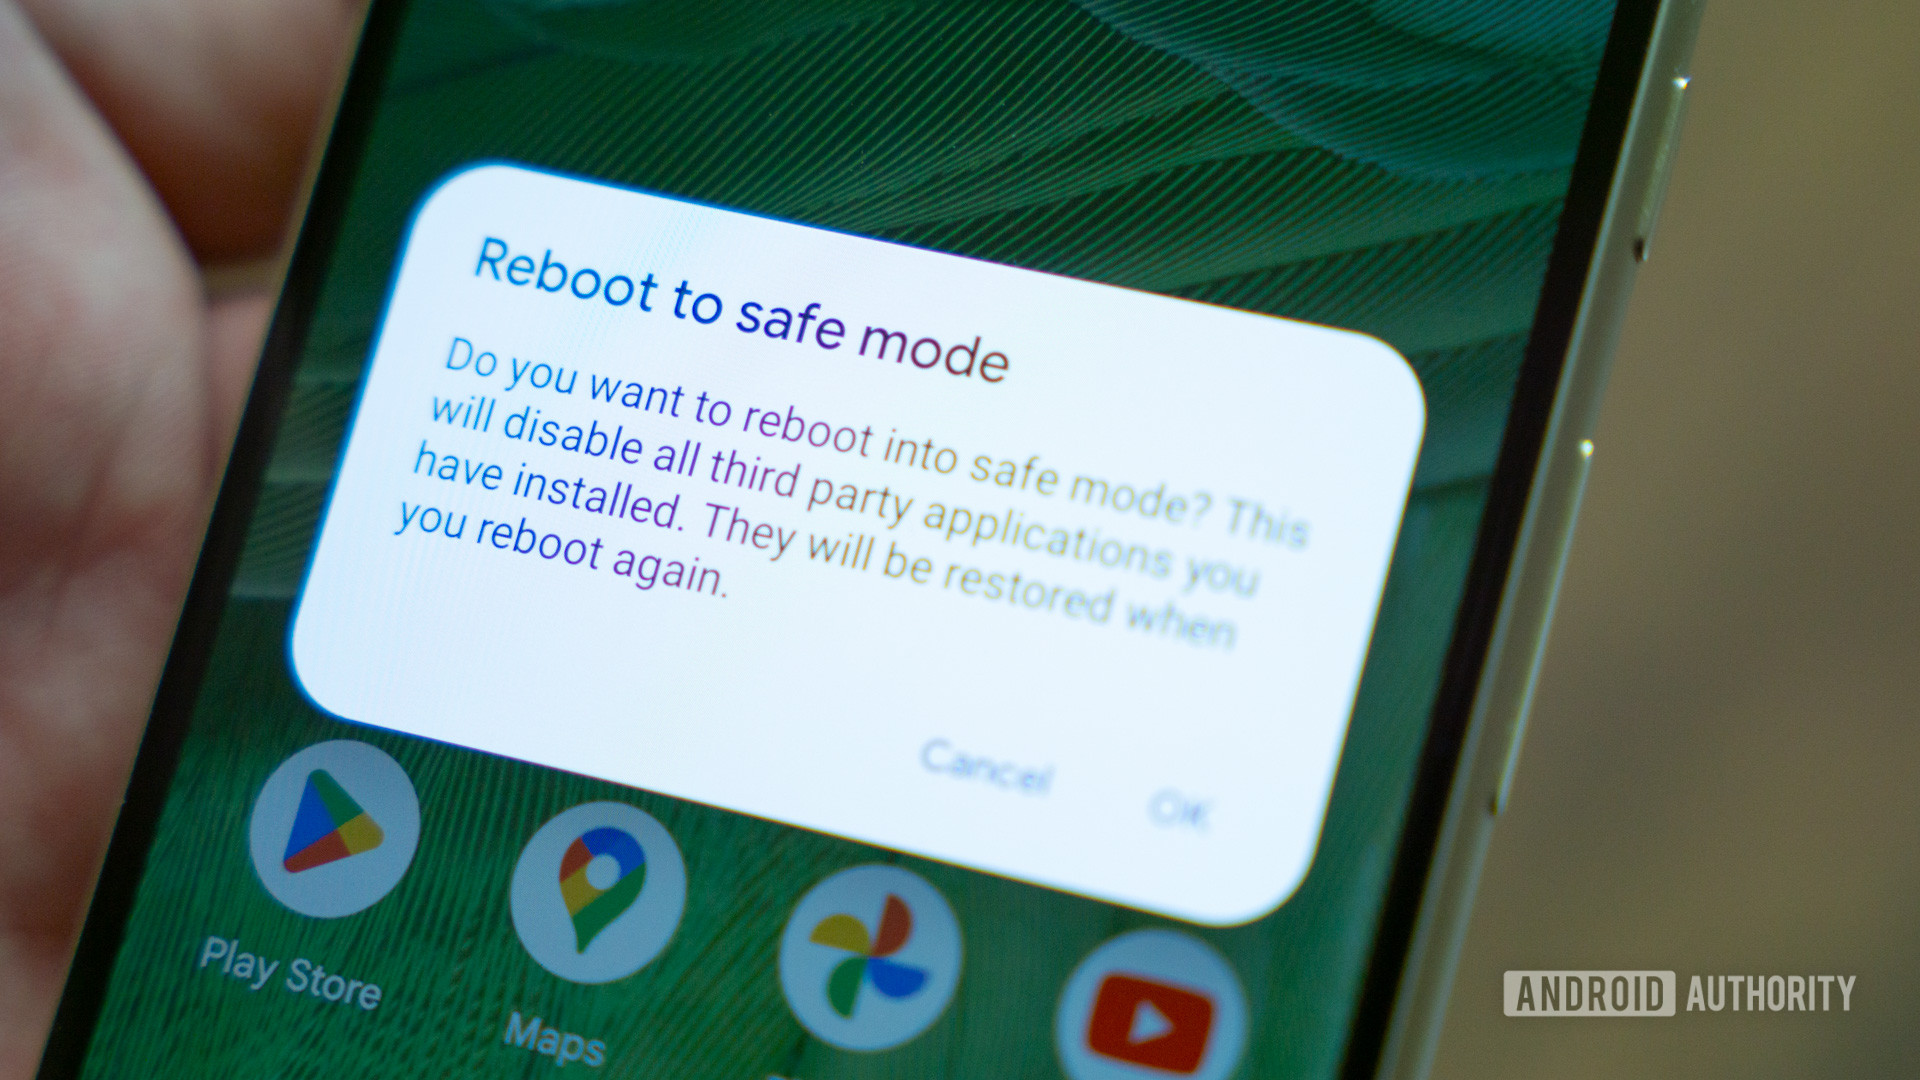 Reboot on safe mode Android stock photo (3)